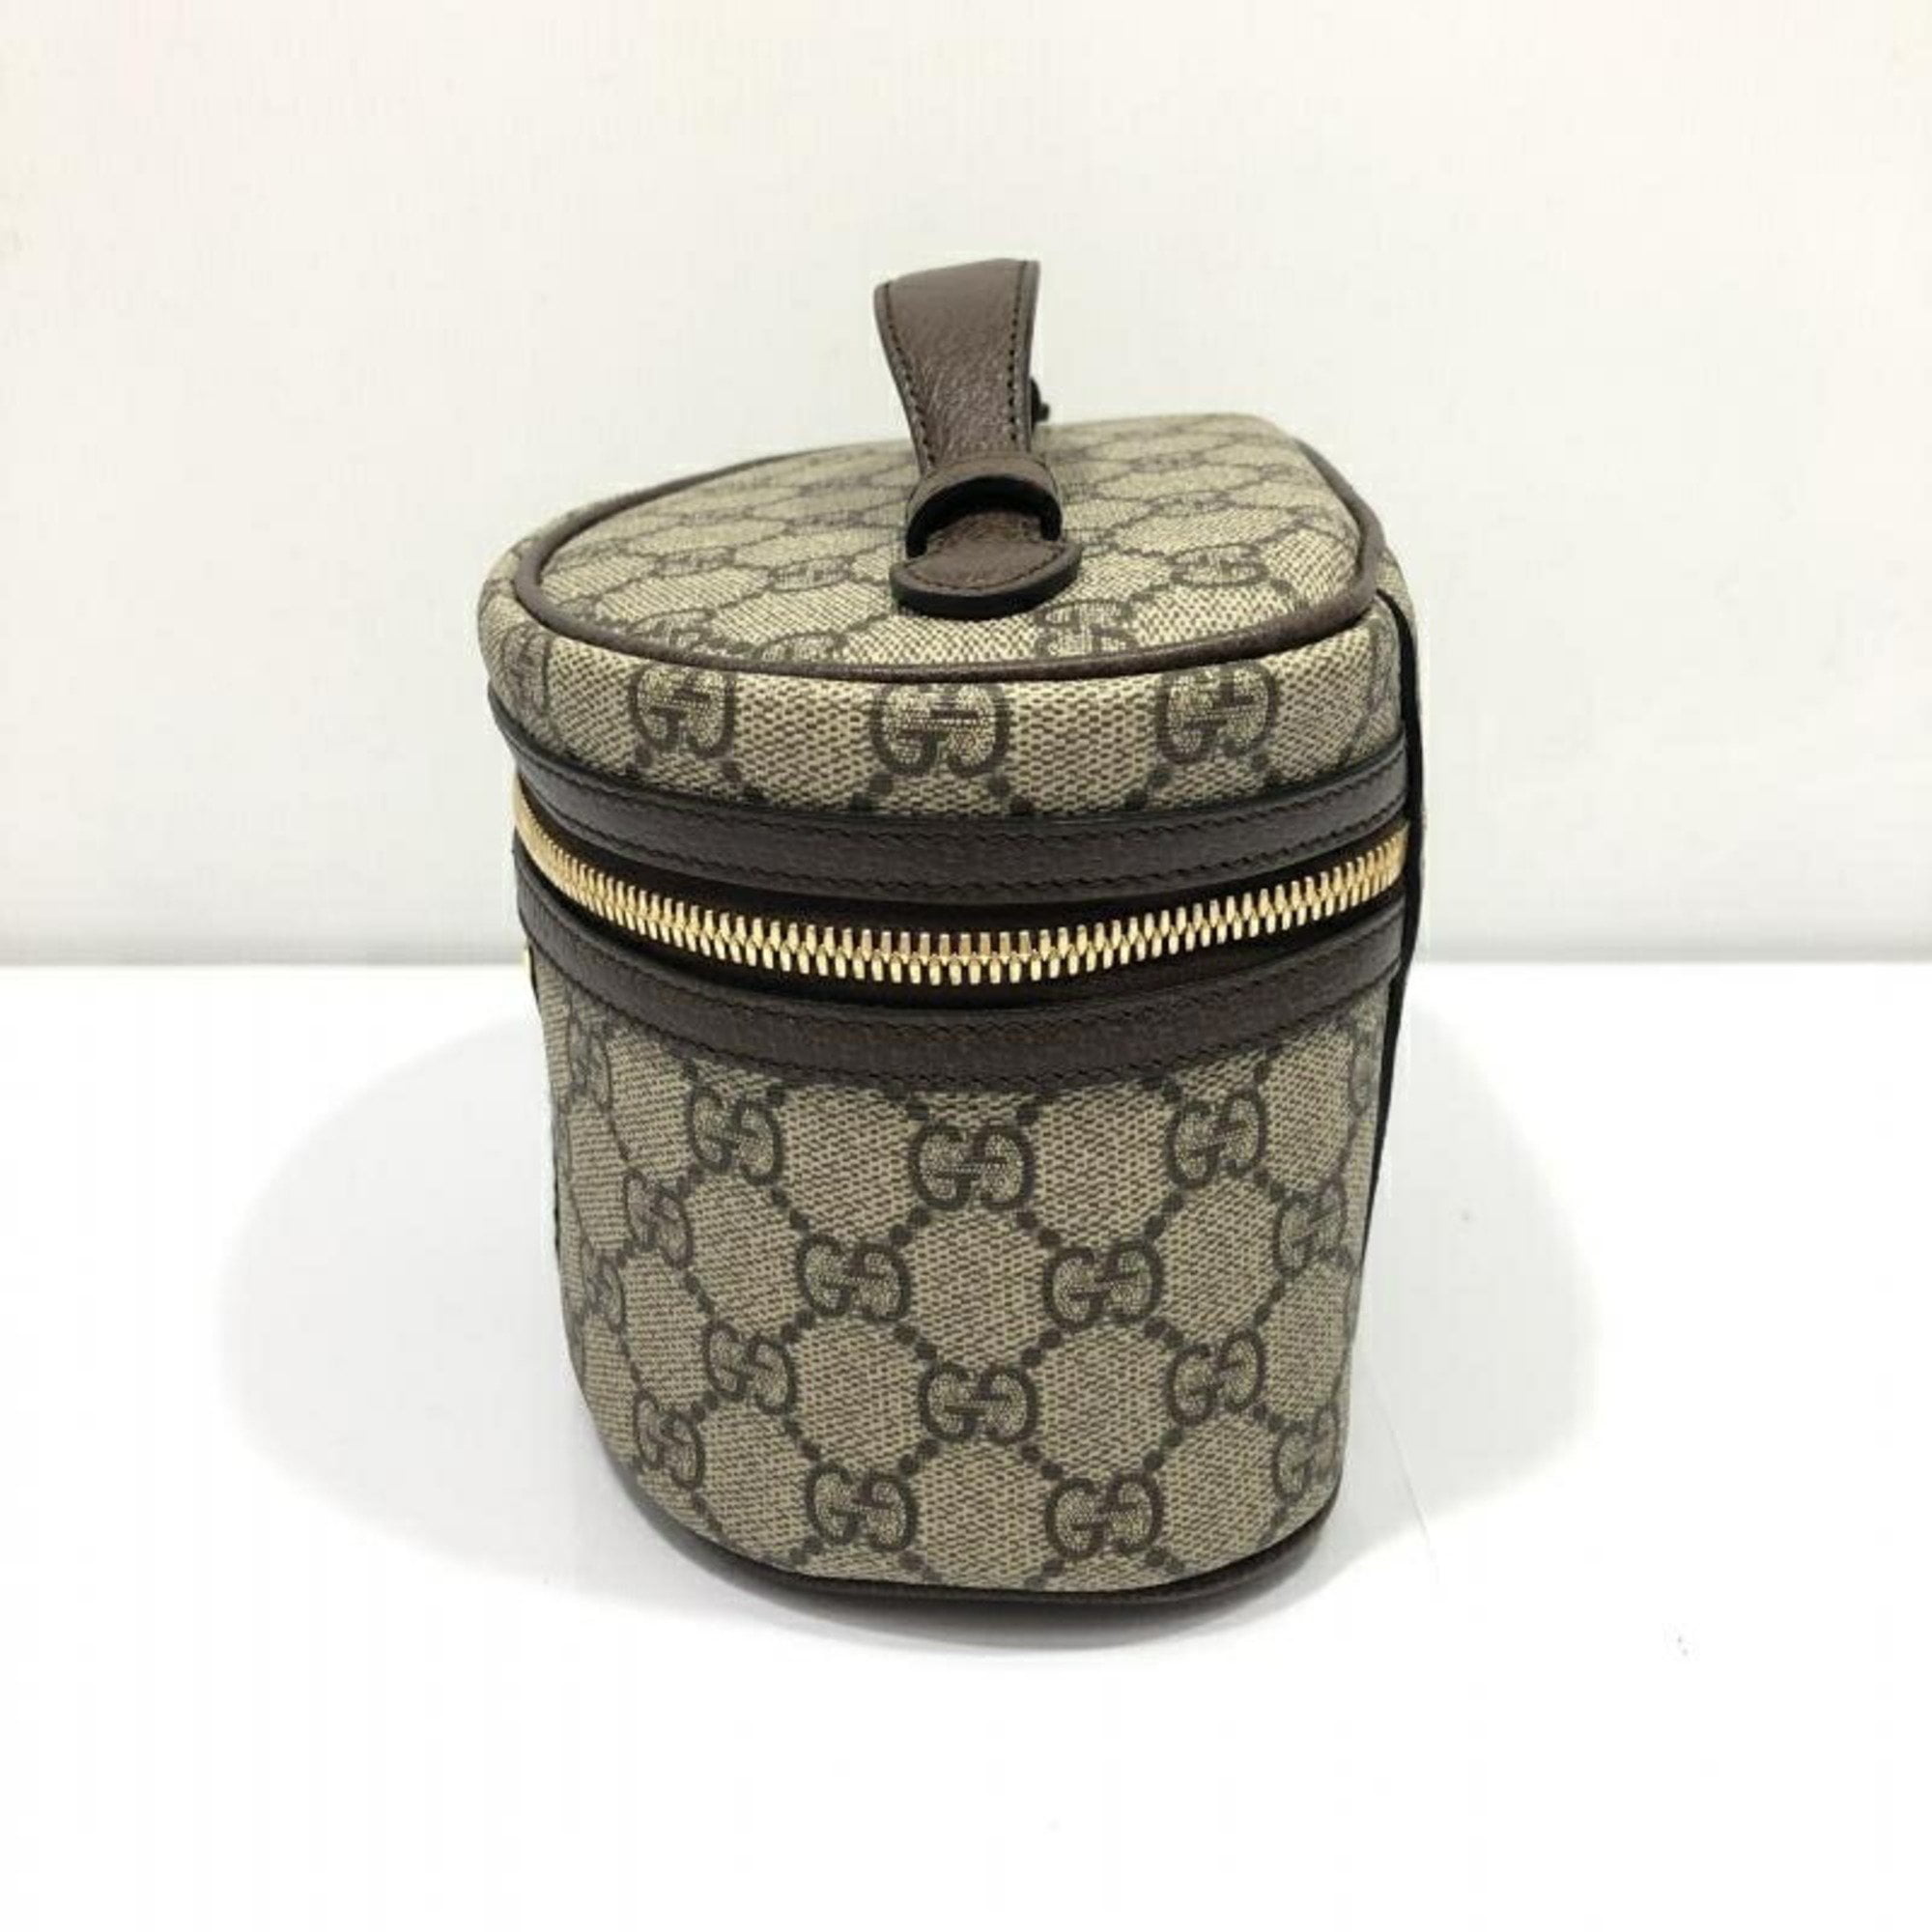 Gucci airpod case, In offer price with free shipping